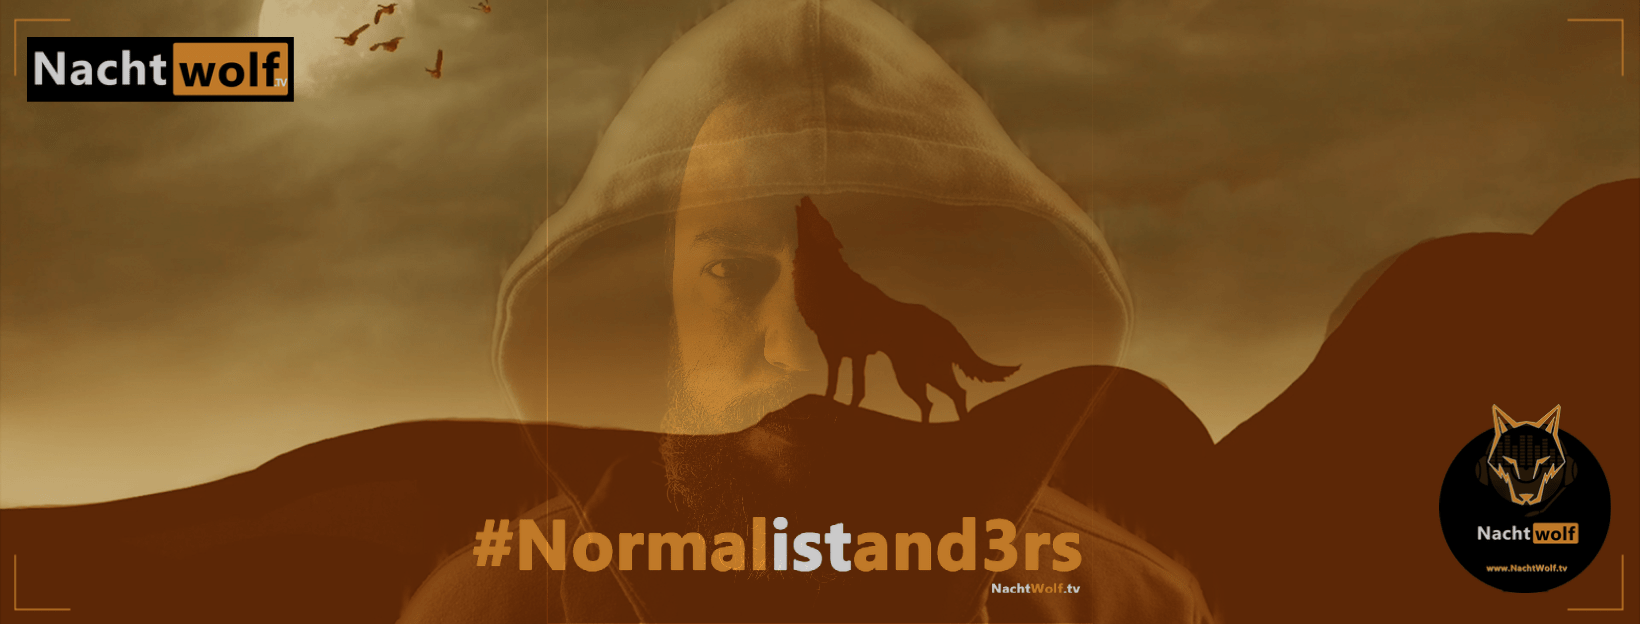 NachtWolf.tv • #Normalistand3rs